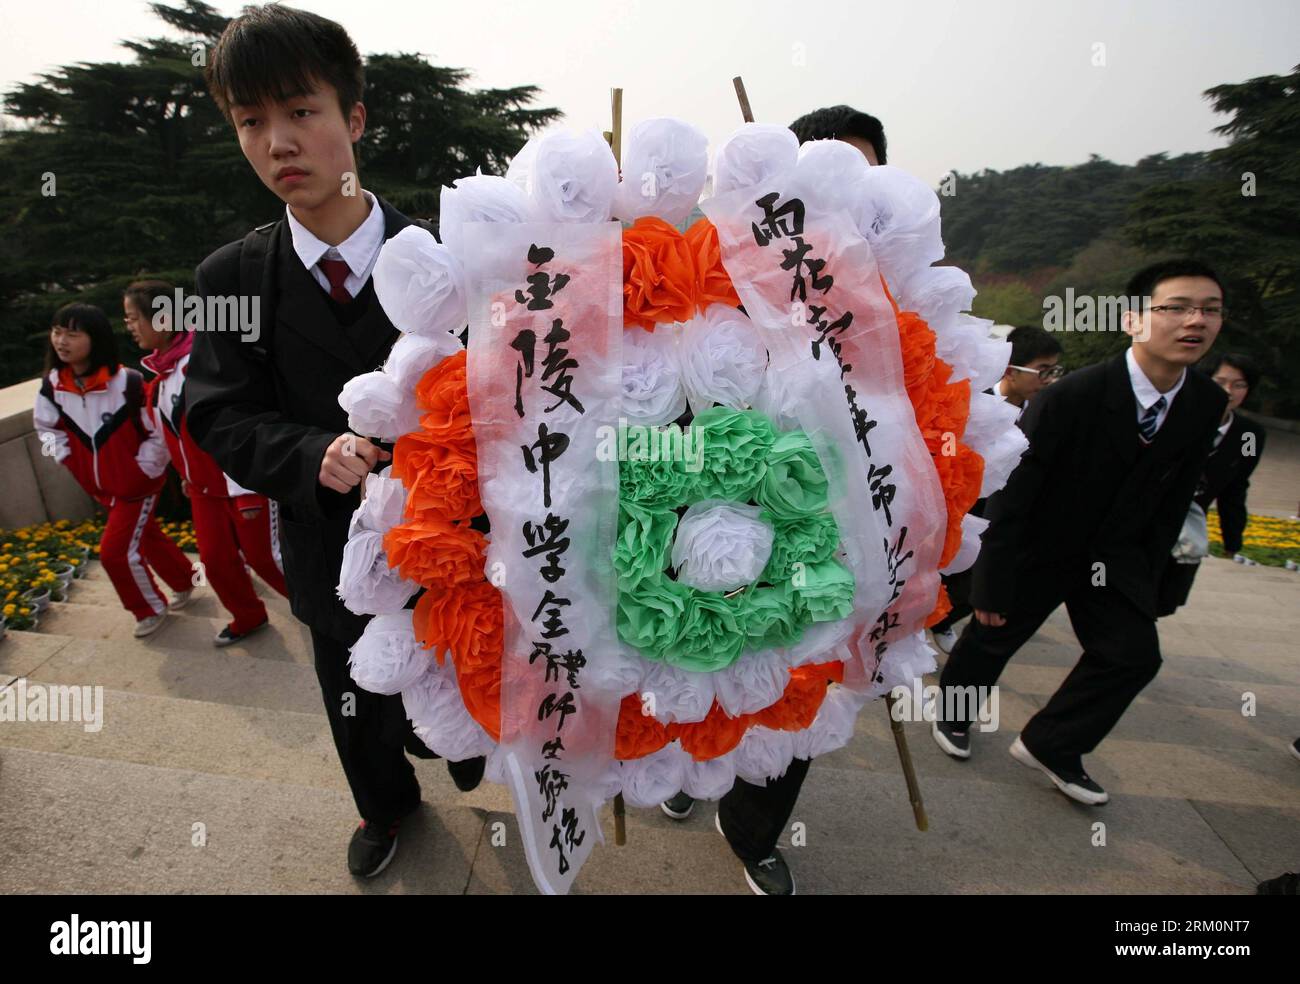 Bildnummer: 59460477  Datum: 30.03.2013  Copyright: imago/Xinhua Students present a wreath to a monument at Yuhuatai Martyr Cemetery in Nanjing, capital of east China s Jiangsu Province, March 30, 2013. Various memorial ceremonies were held across the country to pay respect to martyrs ahead of the Qingming Festival, or Tomb Sweeping Day, which falls on April 4 this year. (Xinhua) (ry) CHINA-QINGMING FESTIVAL-MEMORIAL CEREMONIES (CN) PUBLICATIONxNOTxINxCHN Gesellschaft xas x2x 2013 quer o0 Friedhof Trauer Gedenken  Totenfest Totengedenken Kranz     59460477 Date 30 03 2013 Copyright Imago XINHU Stock Photo